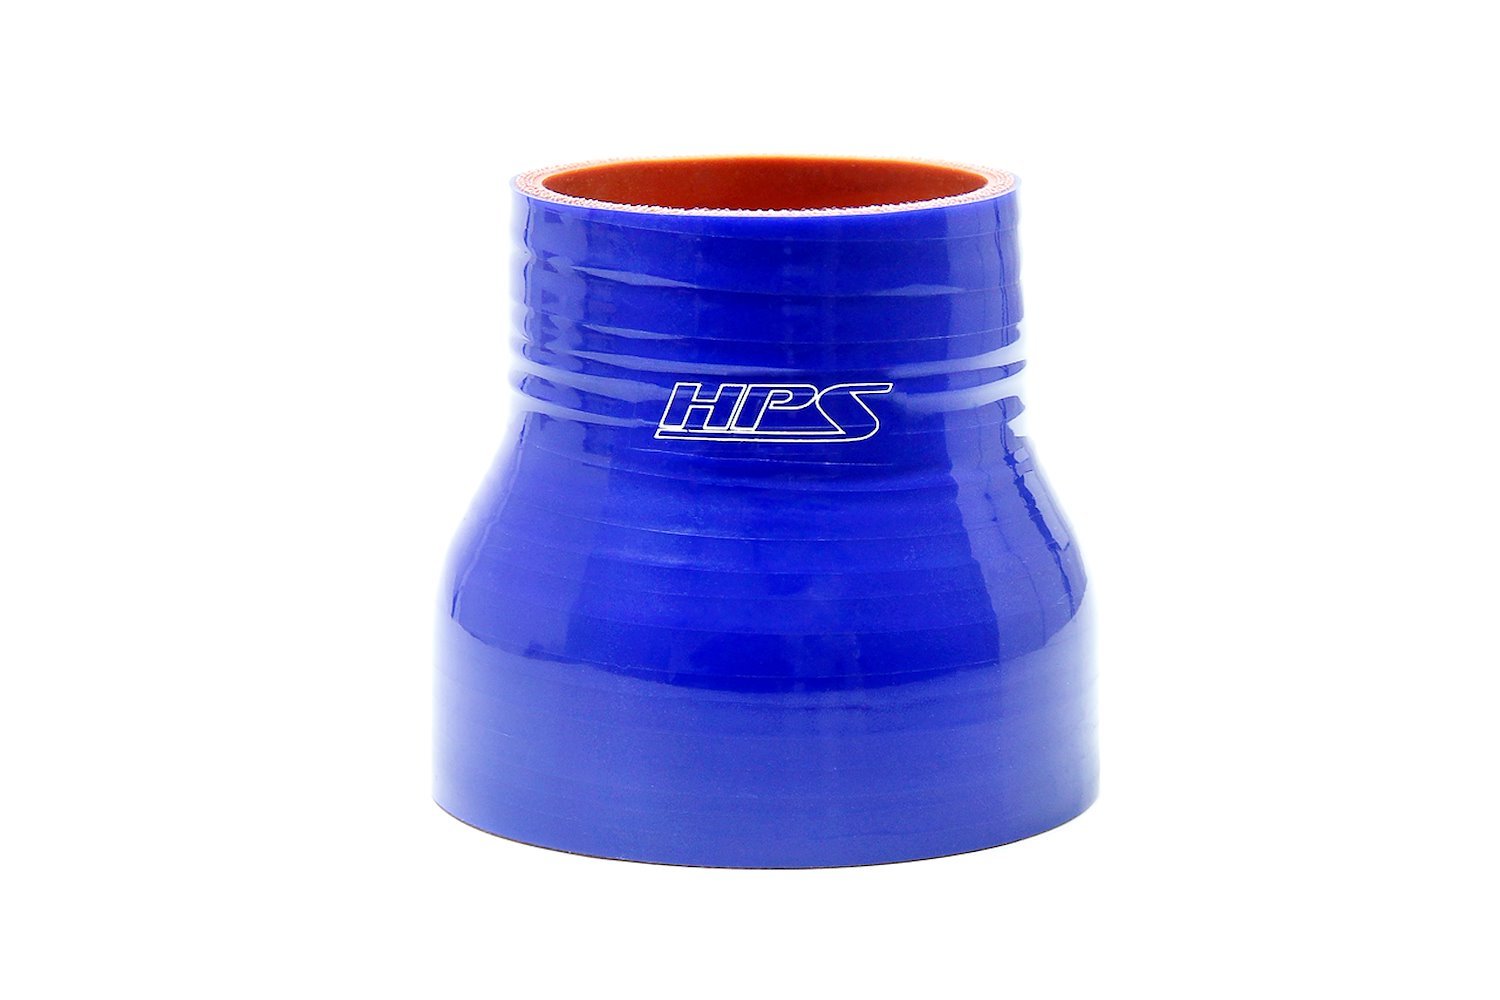 HTSR-325-375-BLUE Silicone Reducer Hose, High-Temp 4-Ply Reinforced, 3-1/4 in. - 3-3/4 in. ID, 3 in. Long, Blue